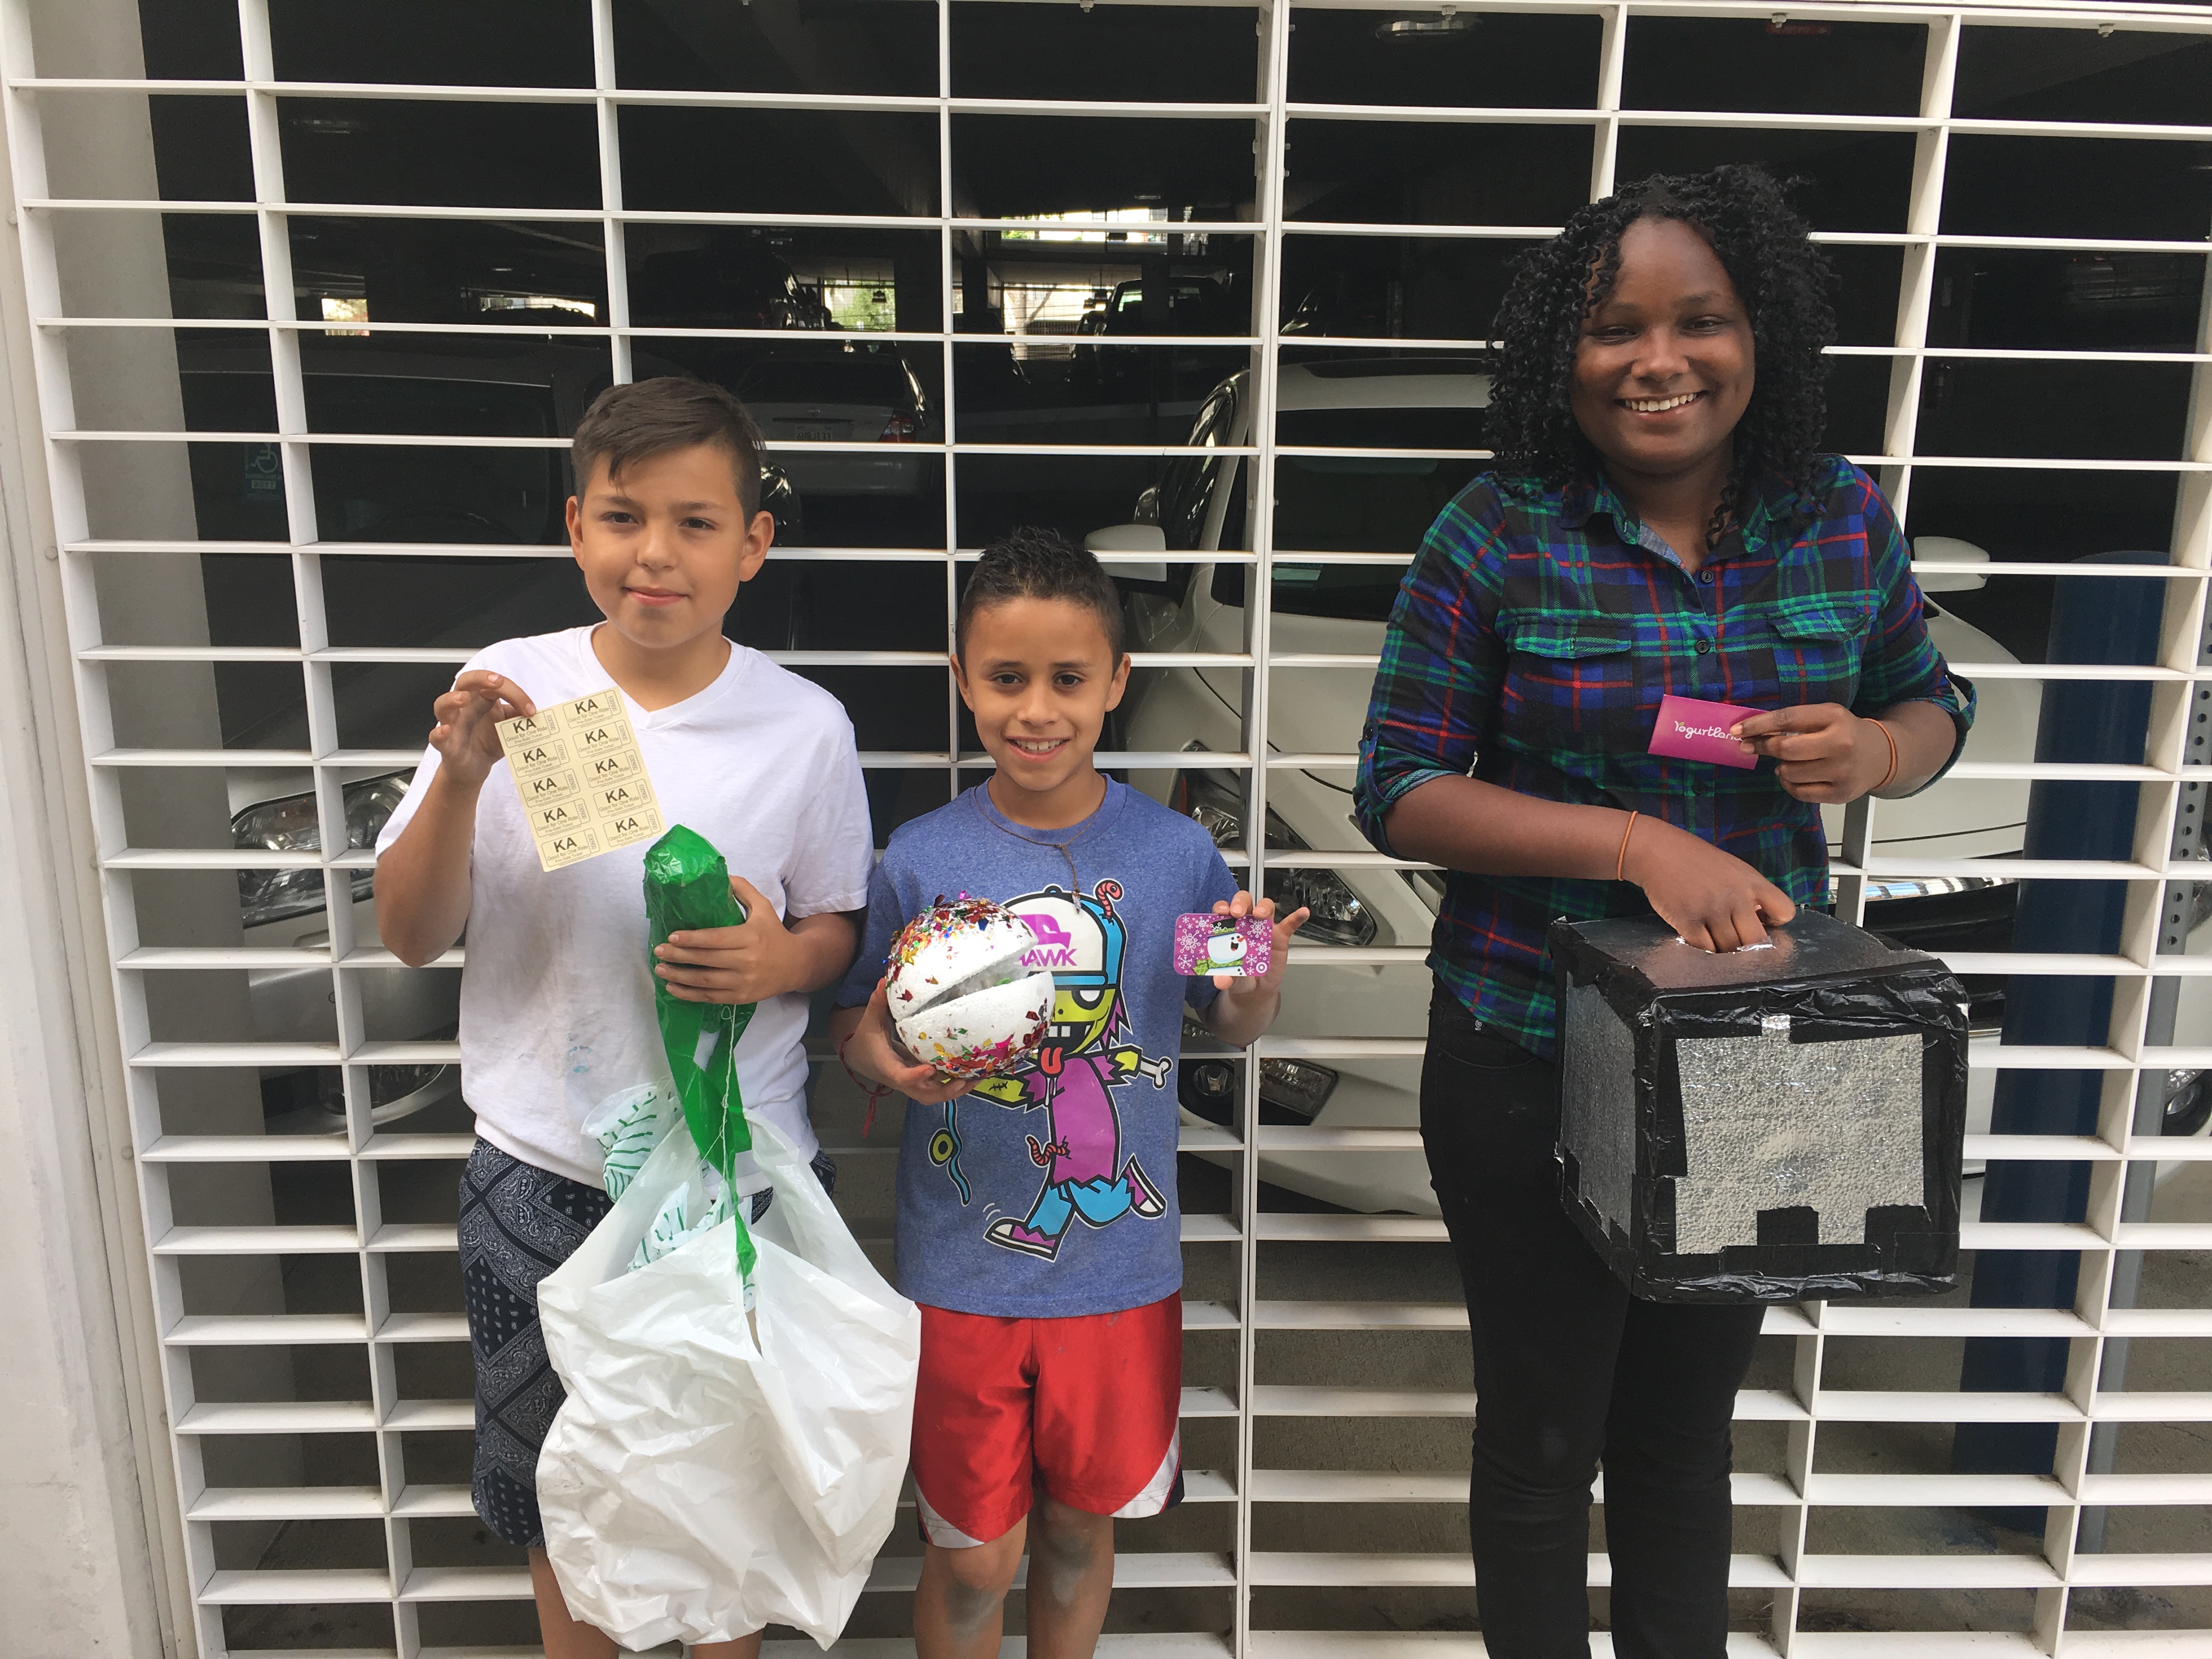 Egg drop contest at Van Nuys Station